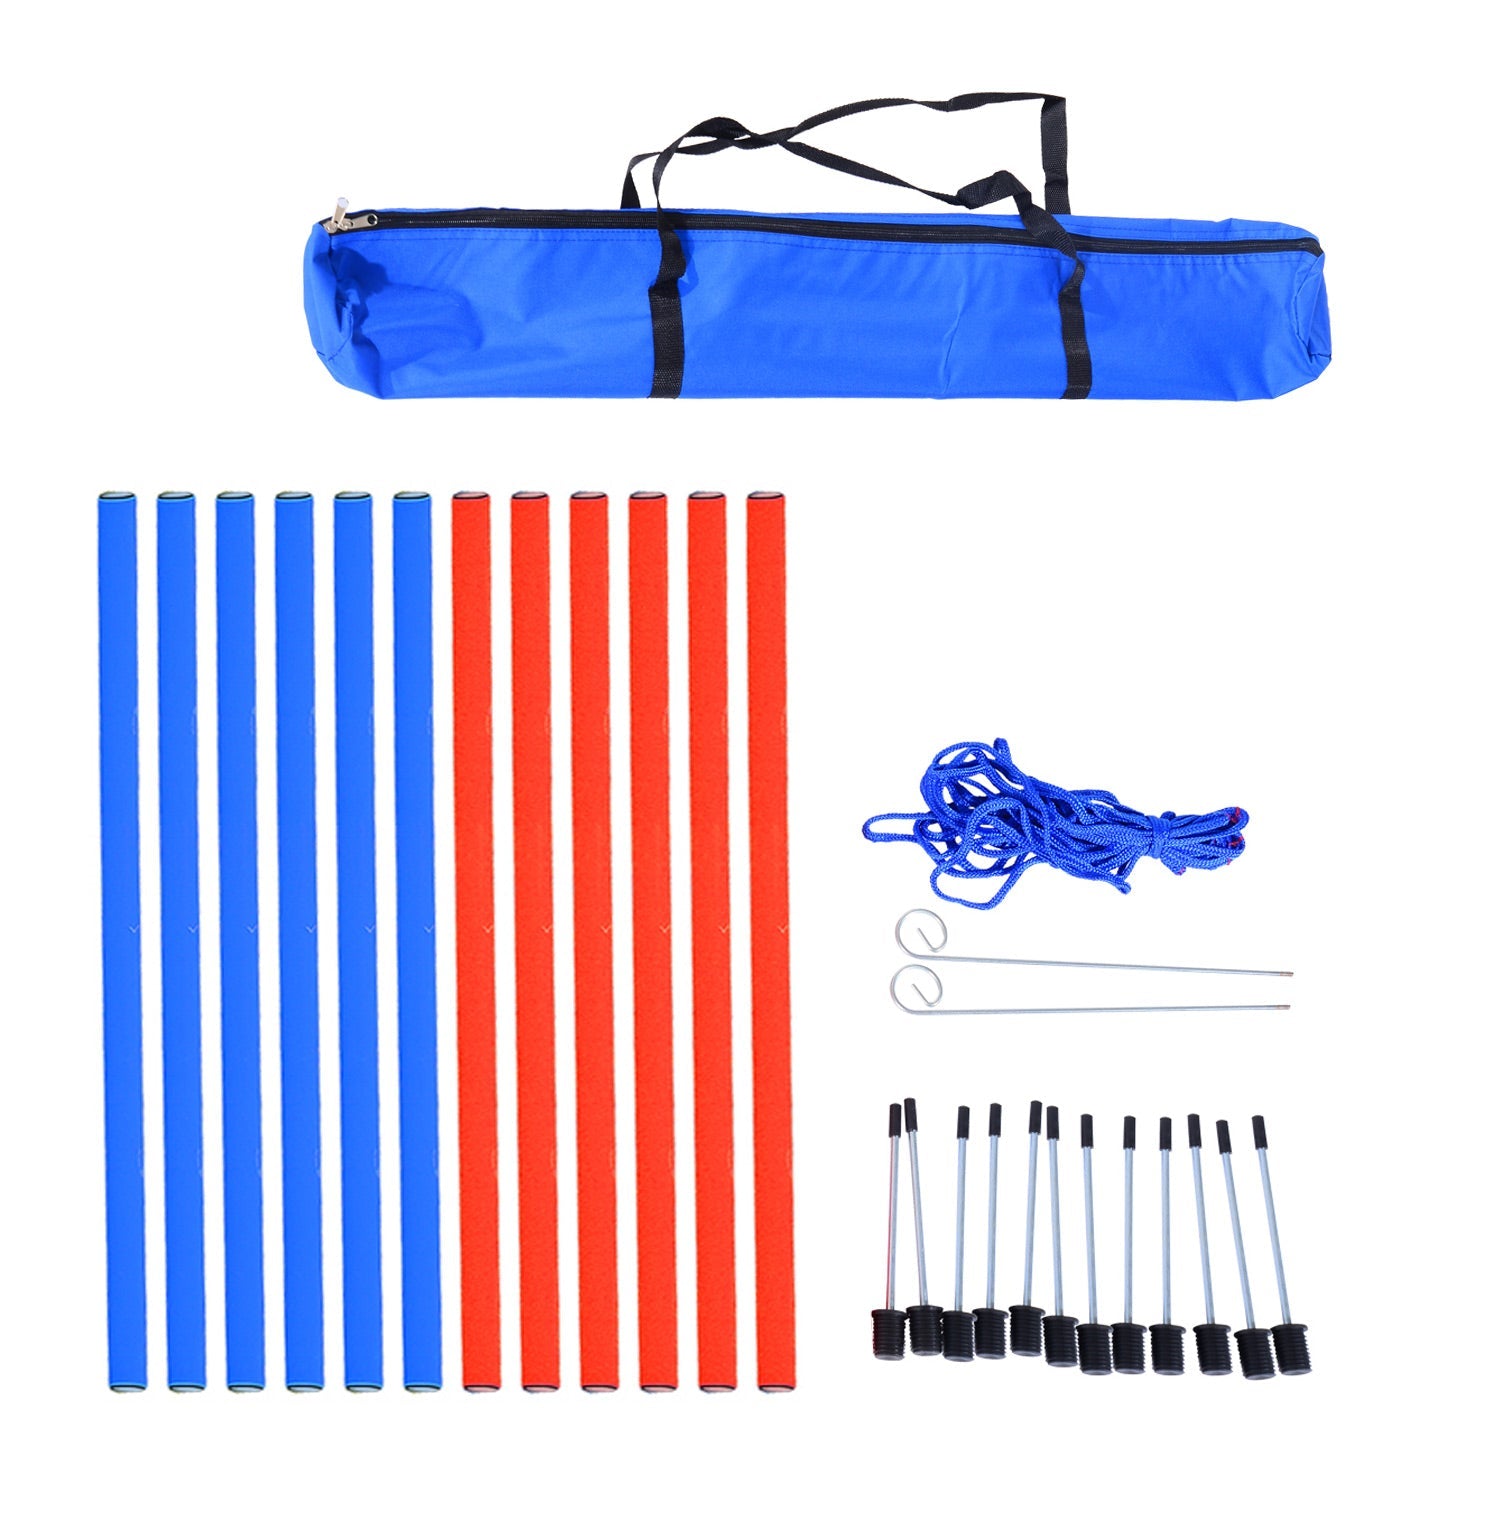 Dog Agility Equipment Set, Portable Dog Agility training equipment for Outdoor Play Run at Gallery Canada